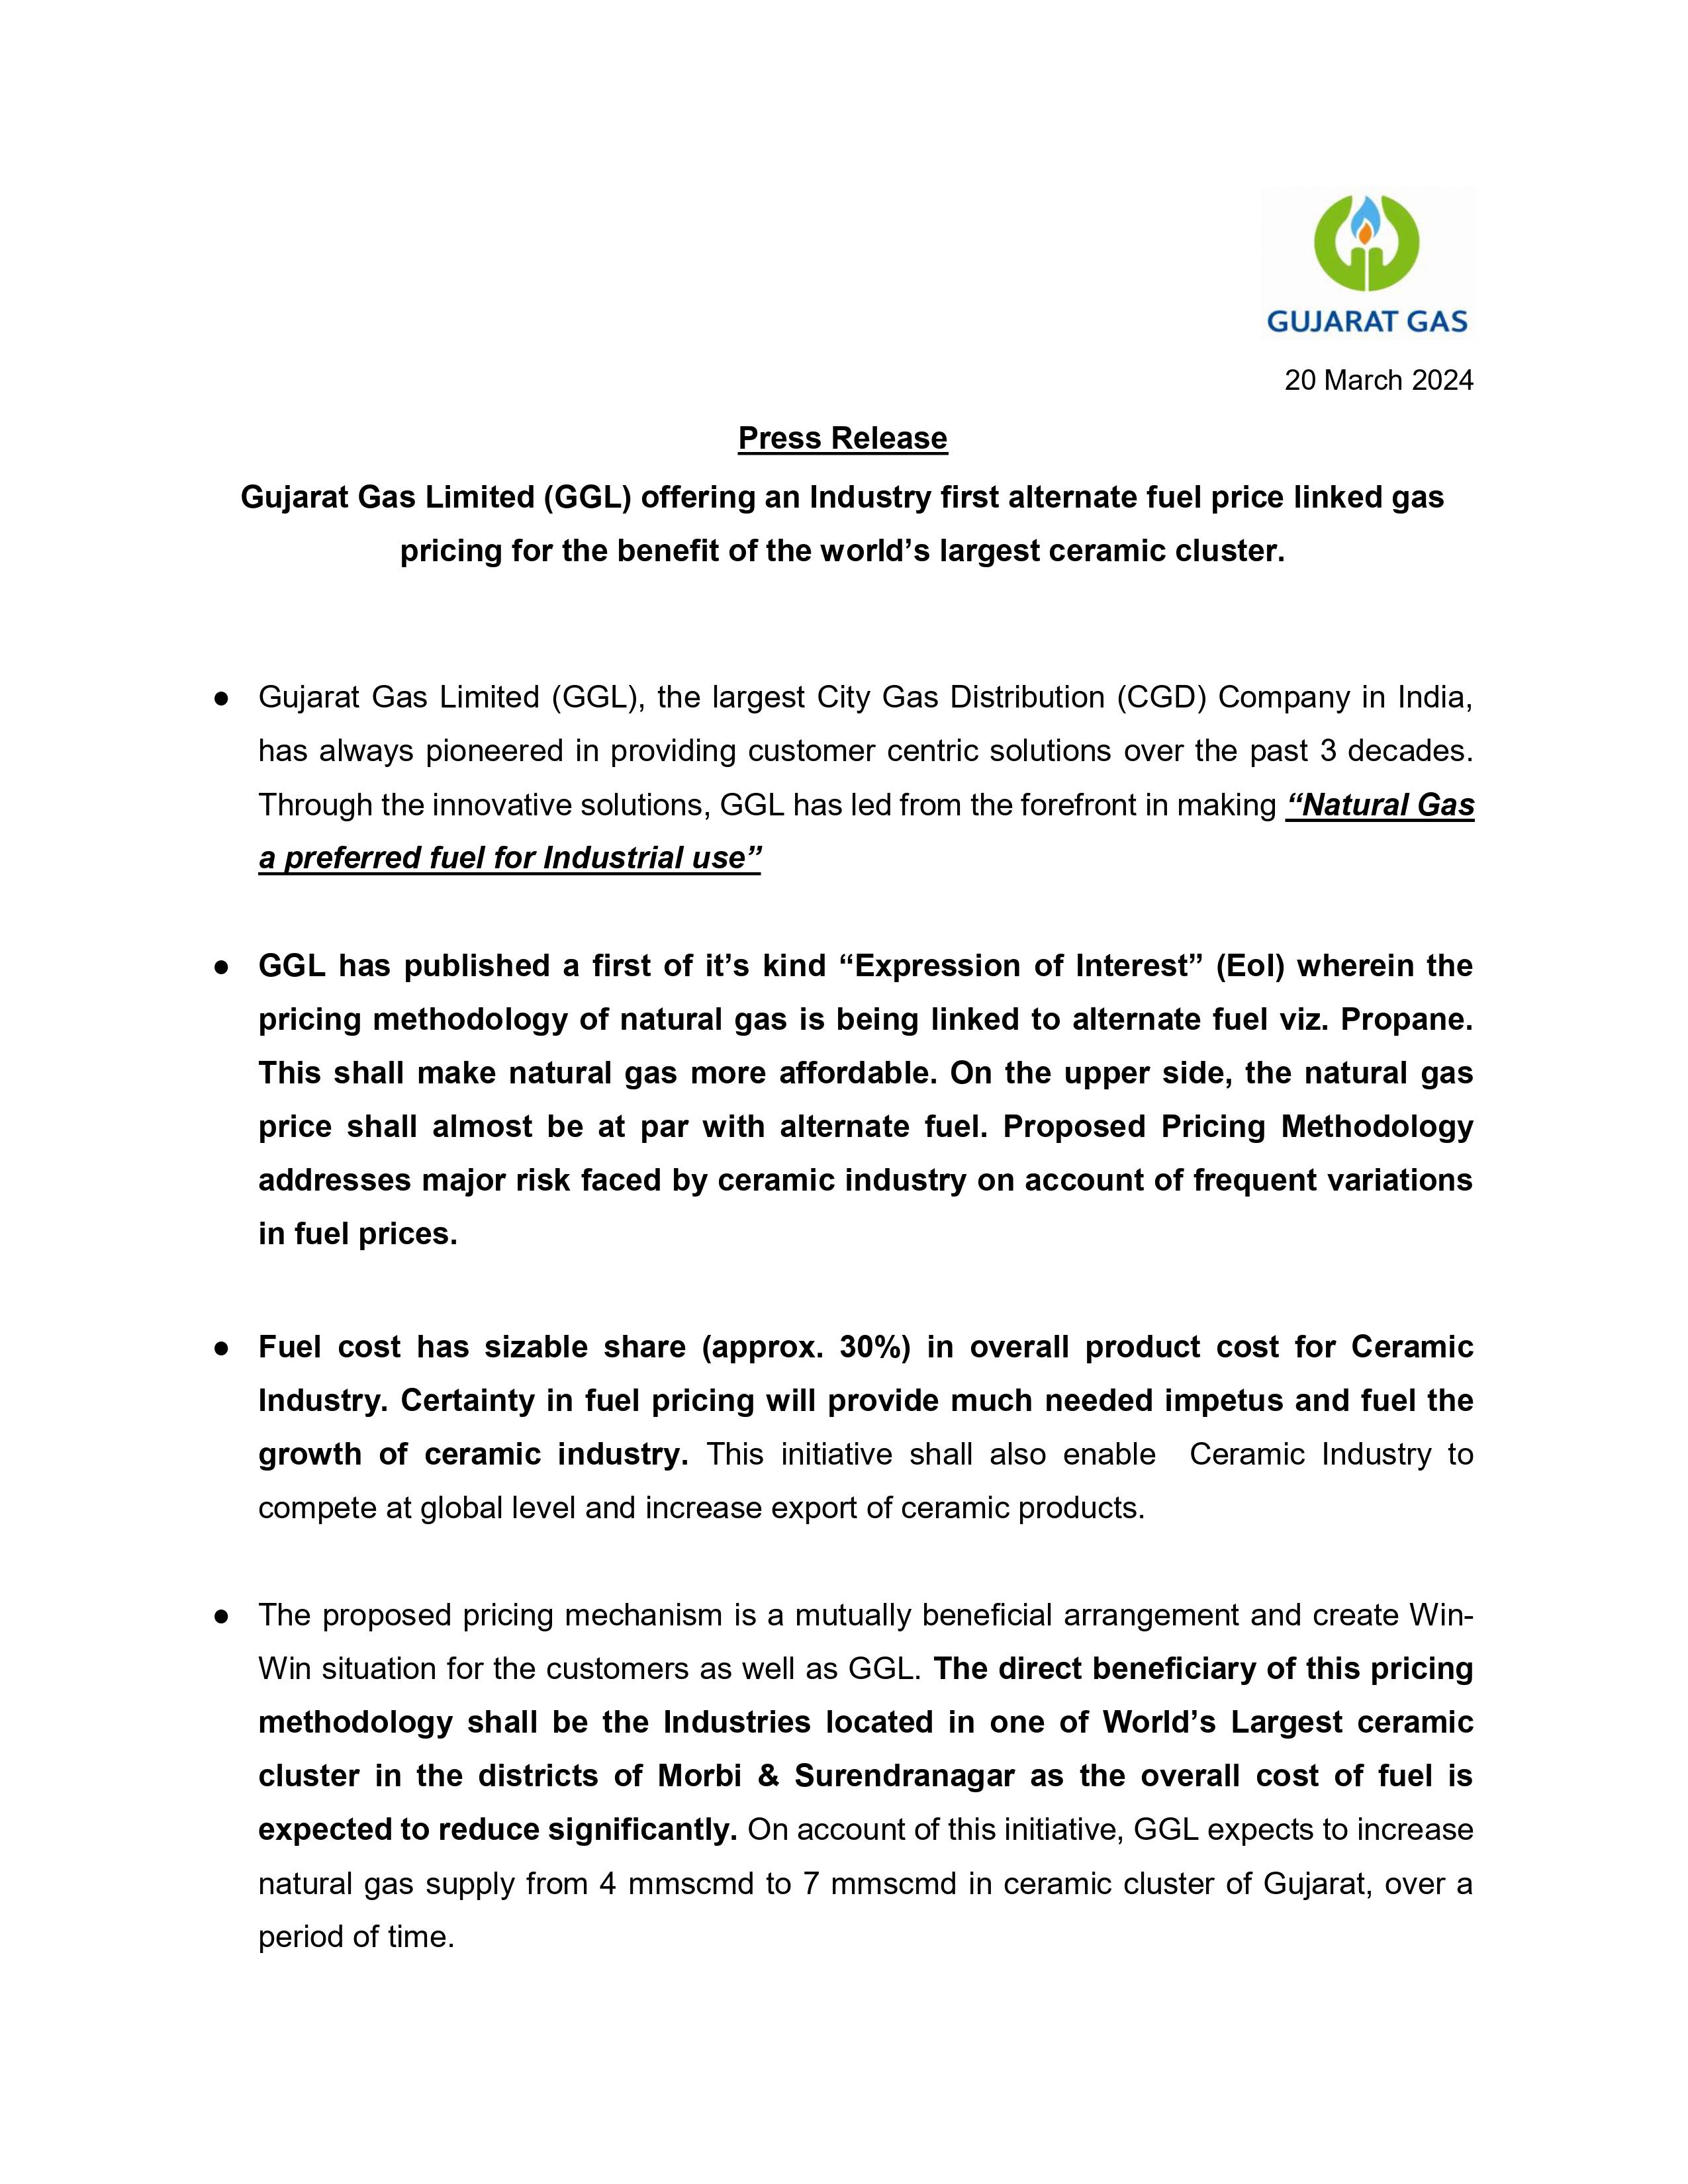 press-release-eoI-alt-fuel-linked-gas-pricing